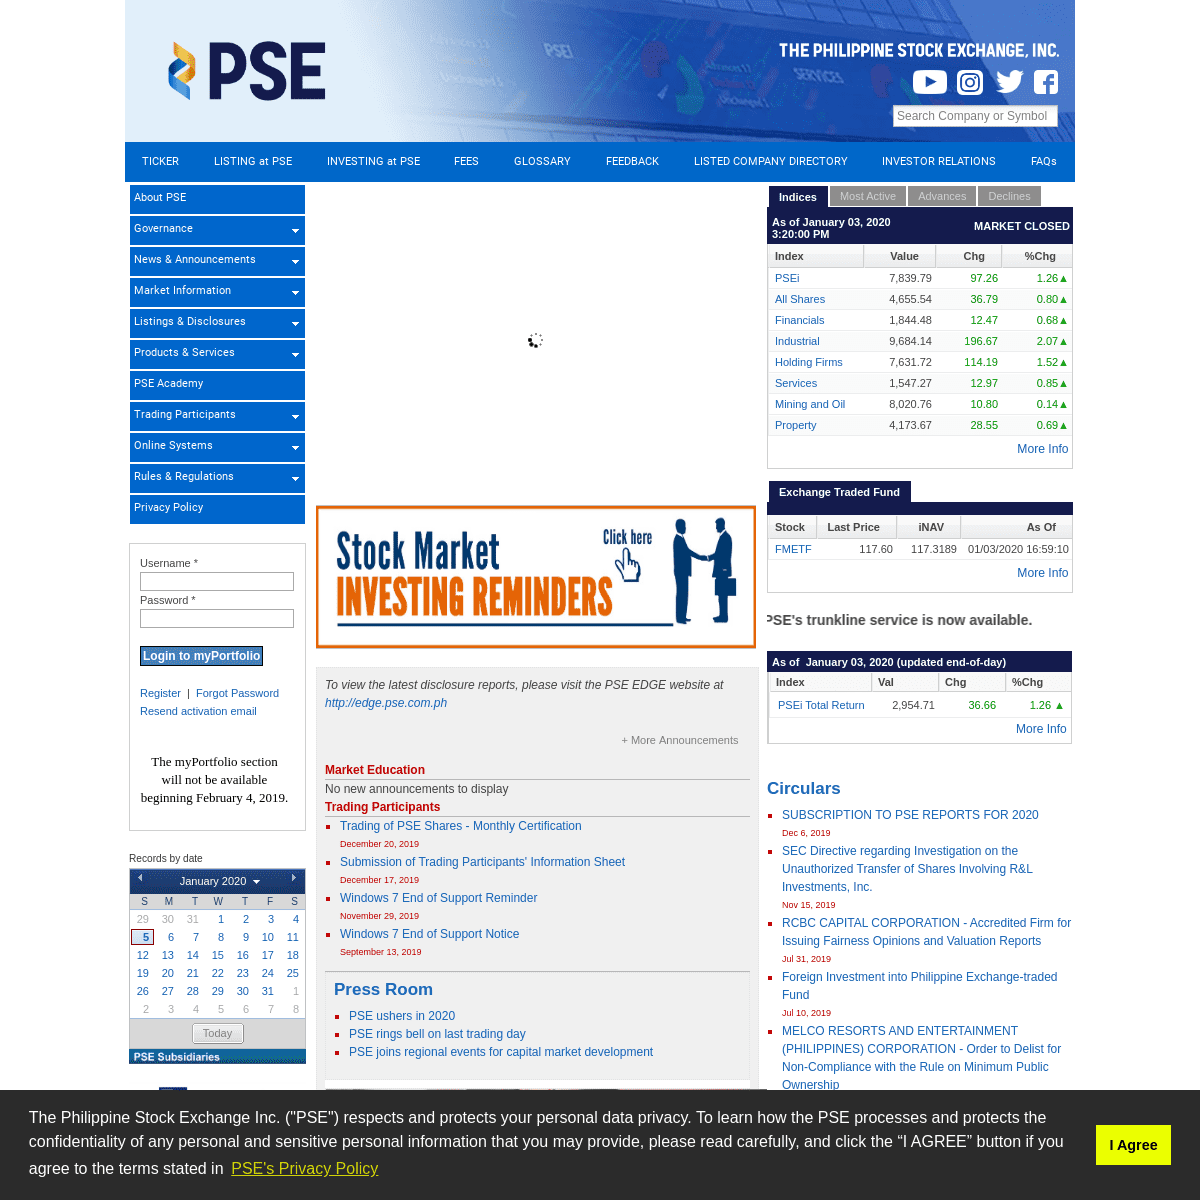 A complete backup of pse.com.ph